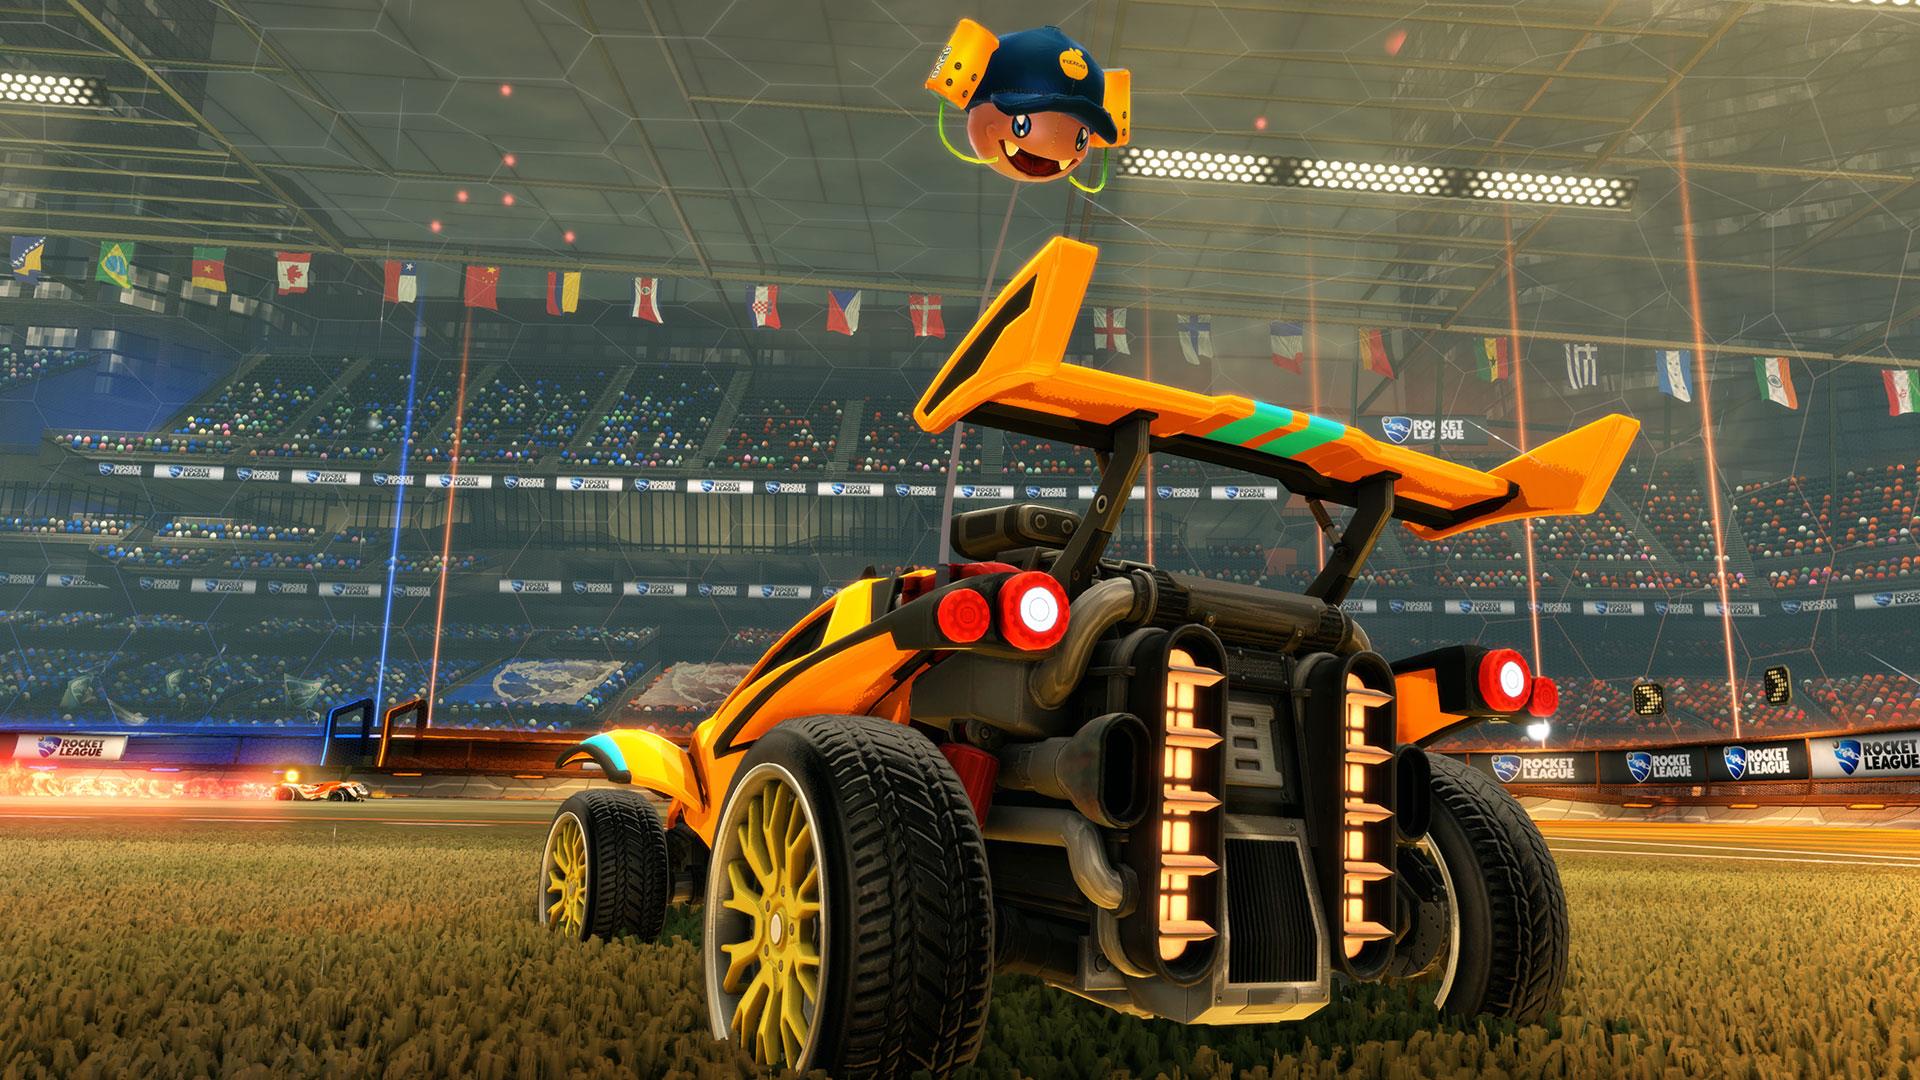 Image for Rocket League on Xbox One has Sunset Overdrive DLC